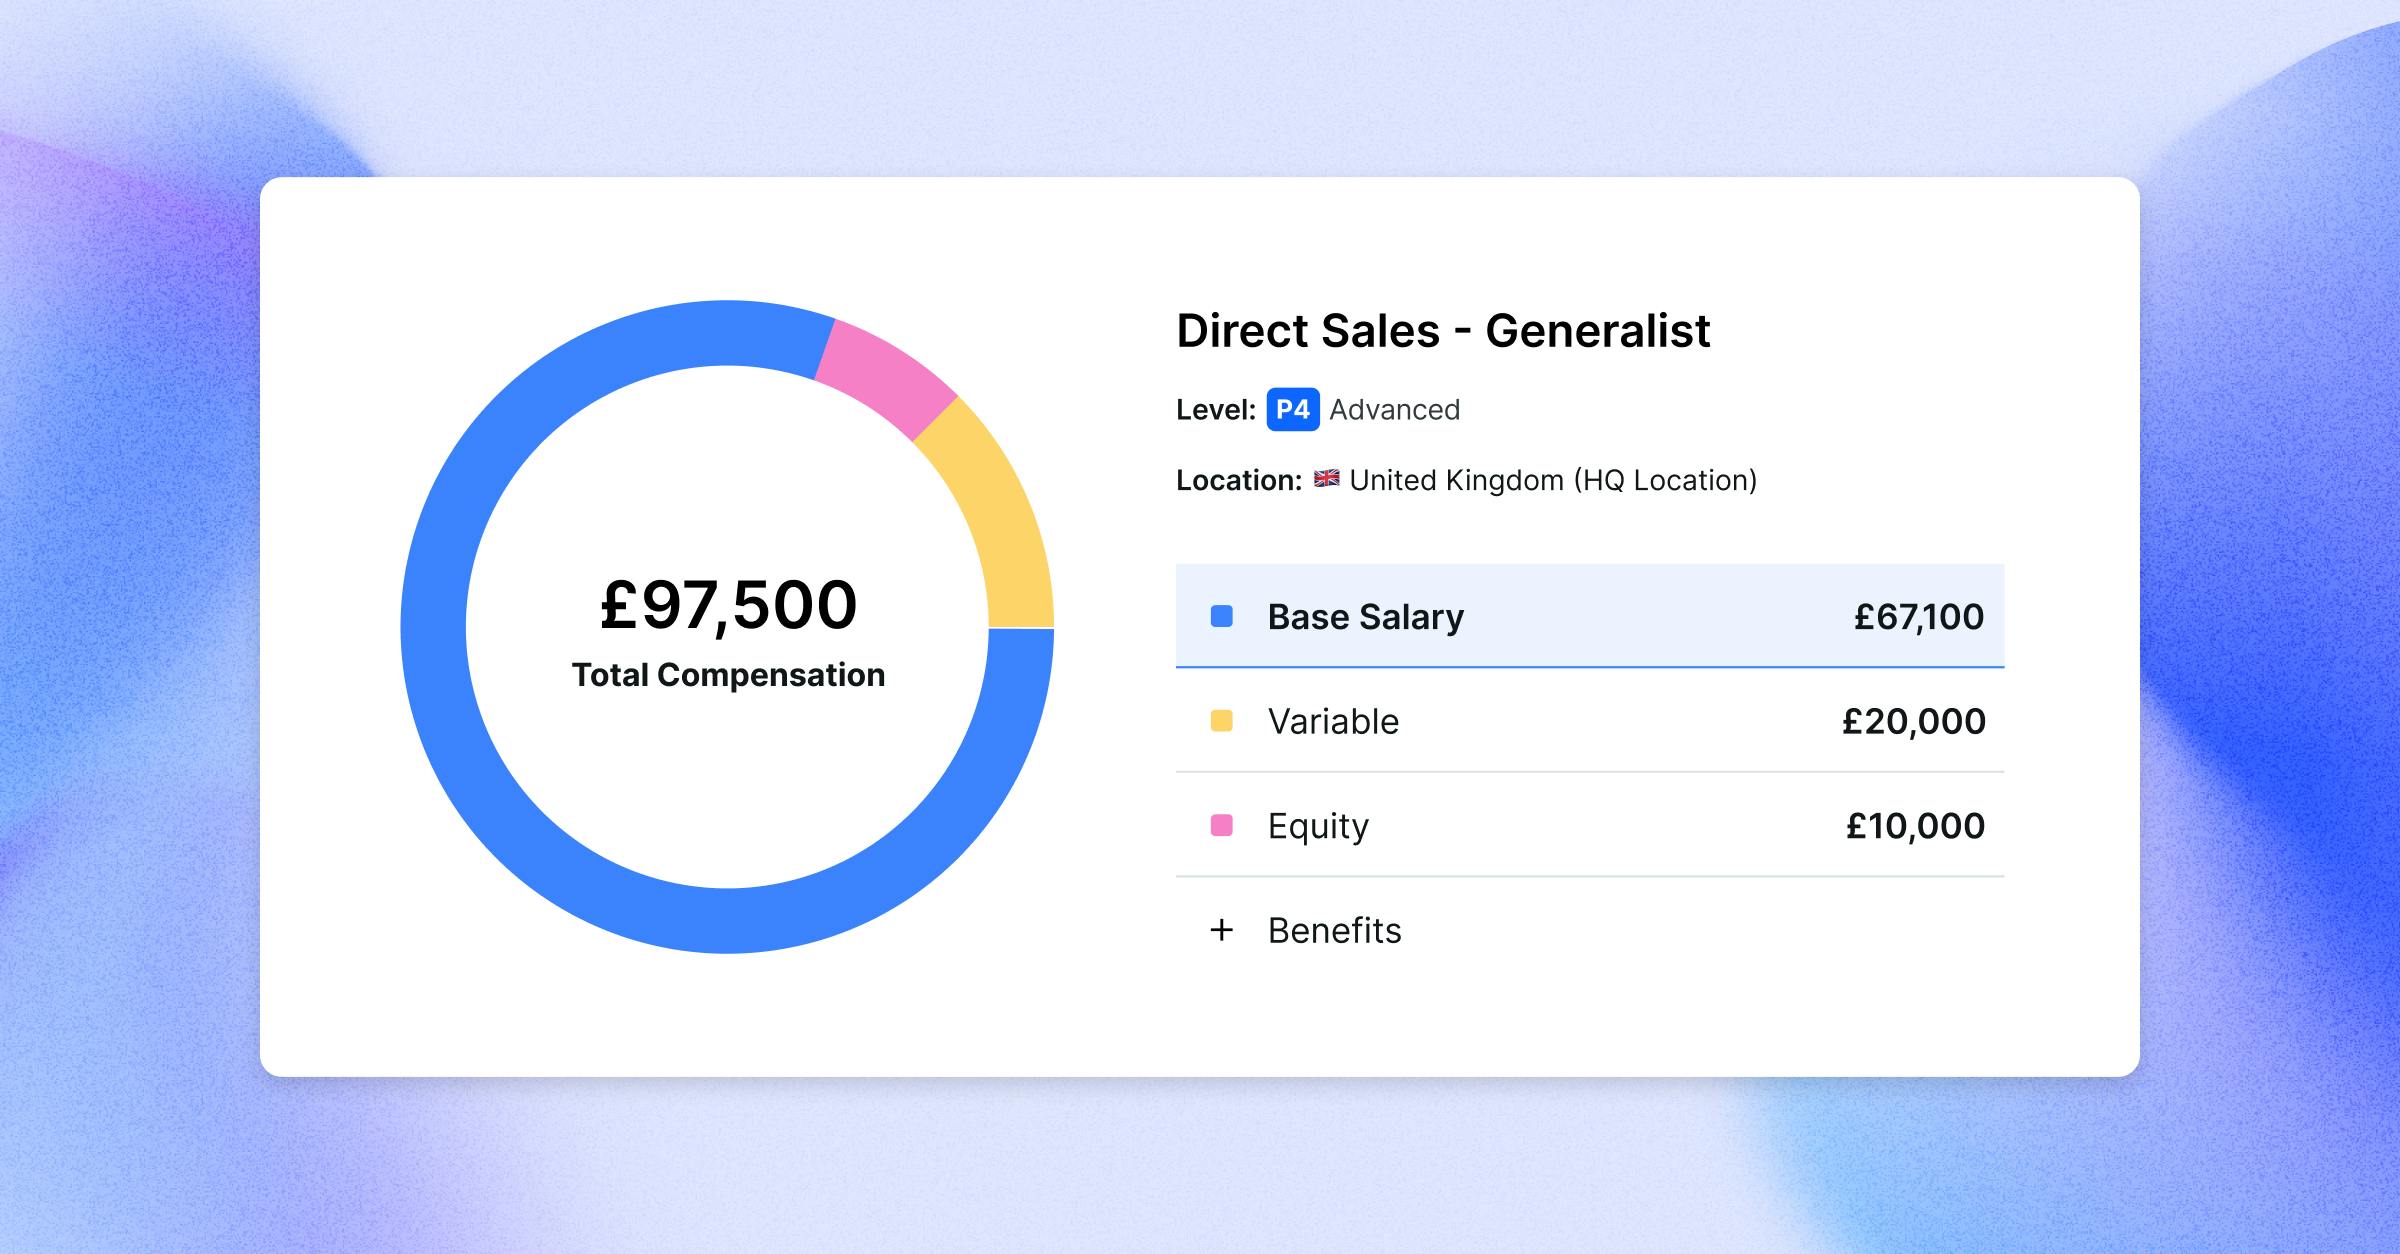 Ravio product screenshot showing a total compensation package offer for a Direct Sales Generalist role in the United Kingdom.